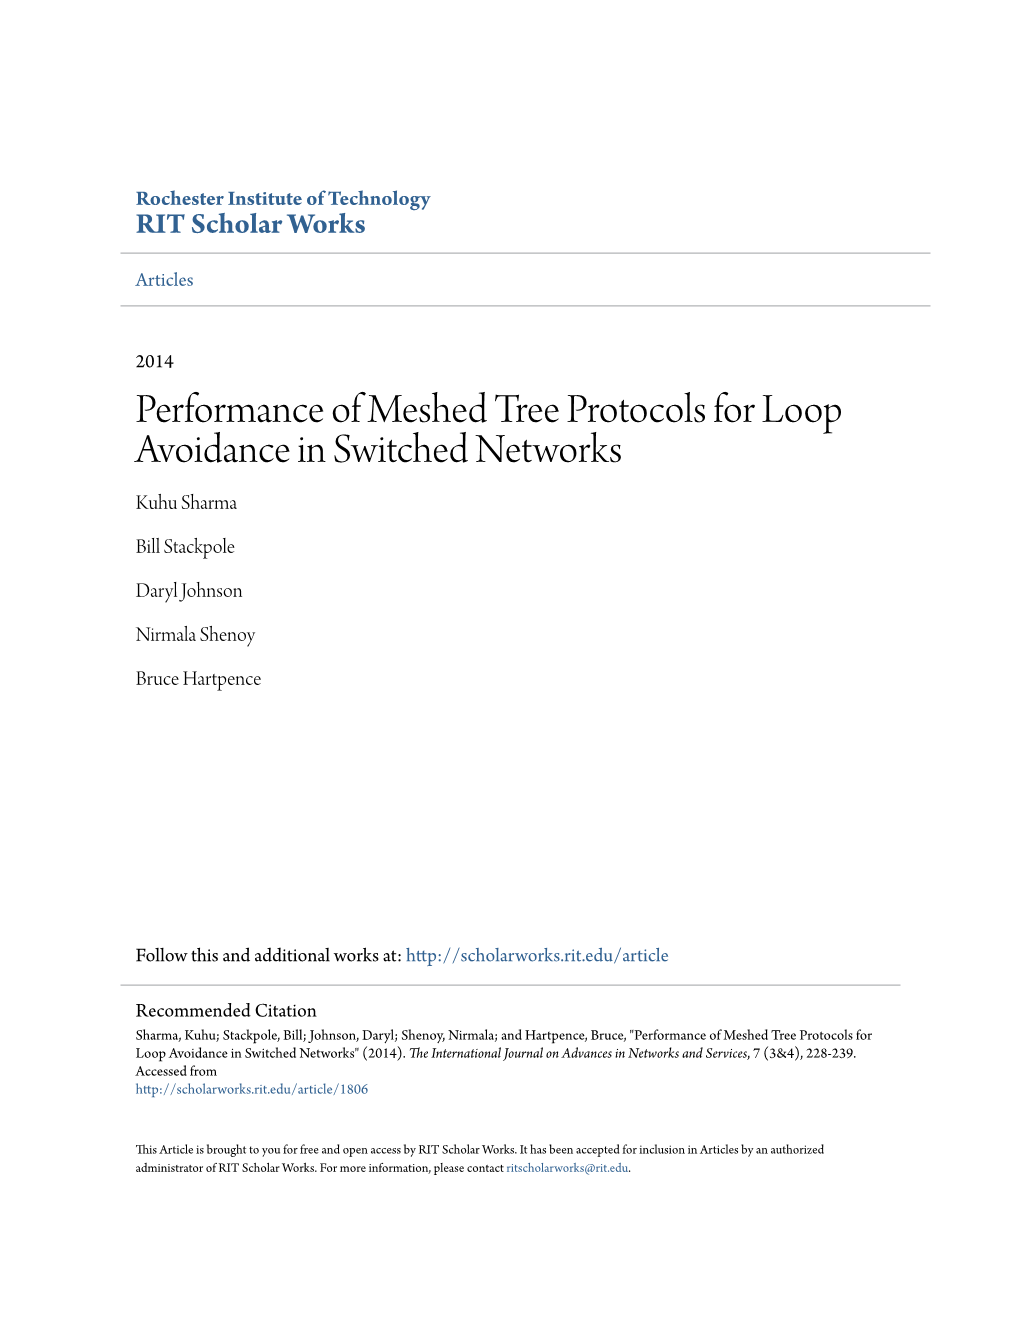 Performance of Meshed Tree Protocols for Loop Avoidance in Switched Networks Kuhu Sharma